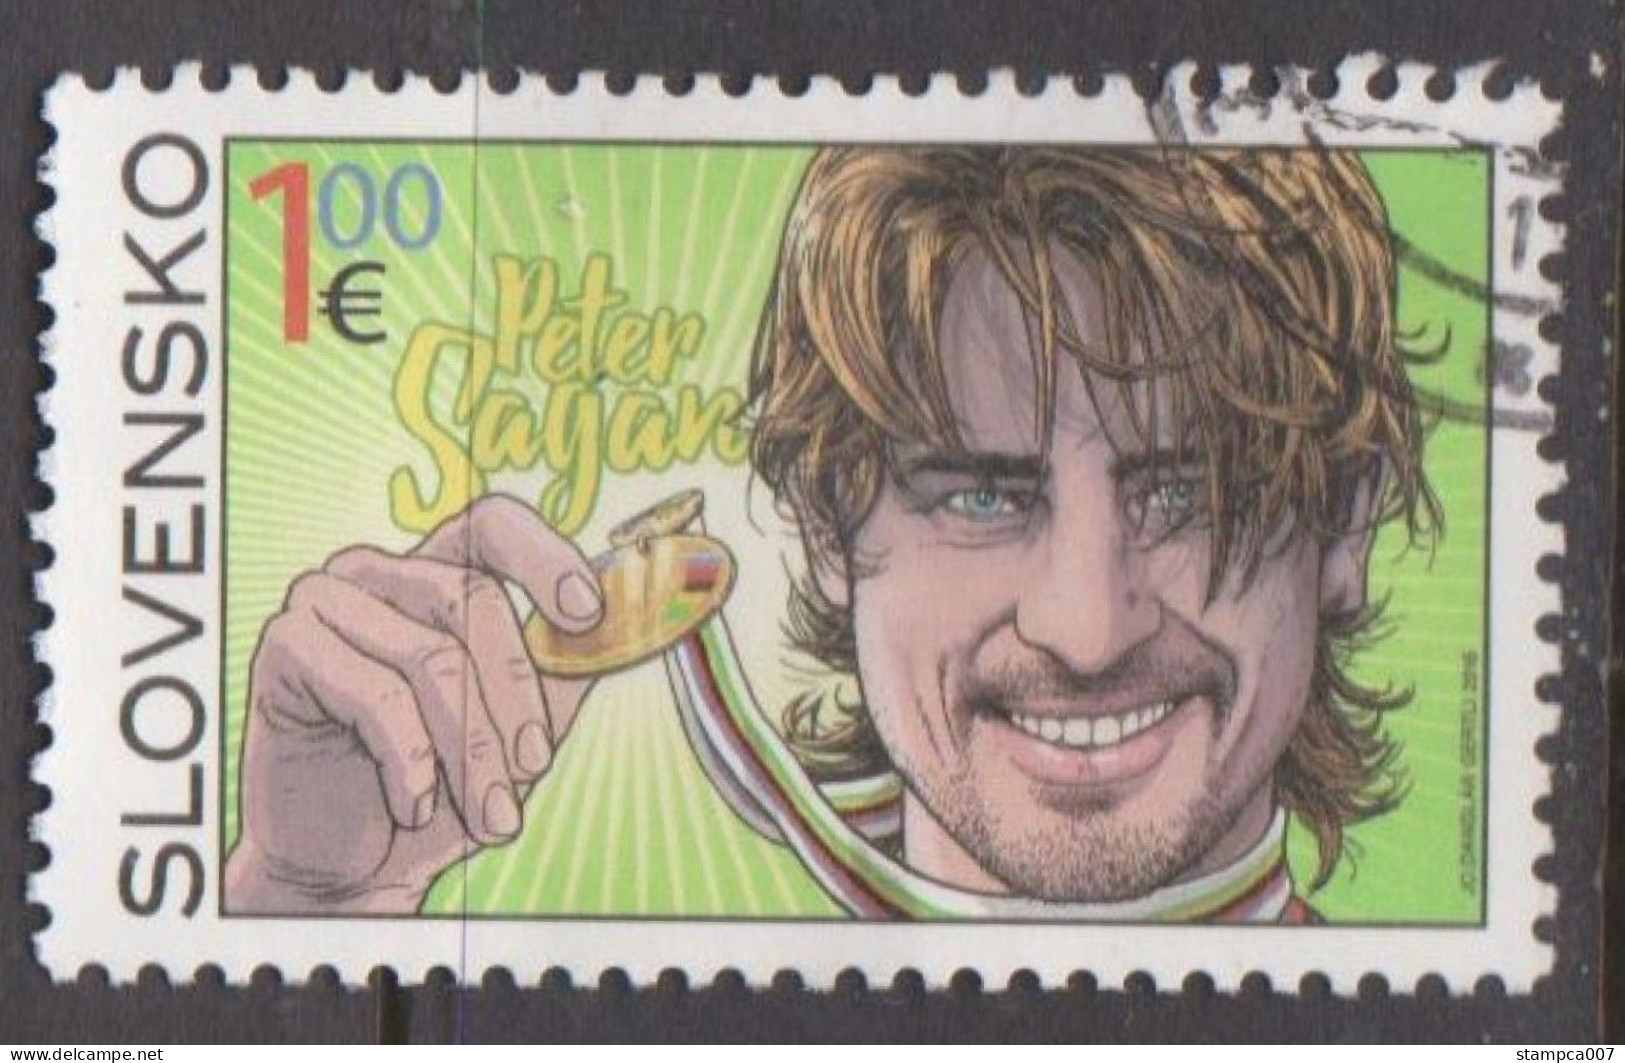 2016 Y/T 688 Sport Velo Wielrennen Cycling Peter Sagan - Used Stamps